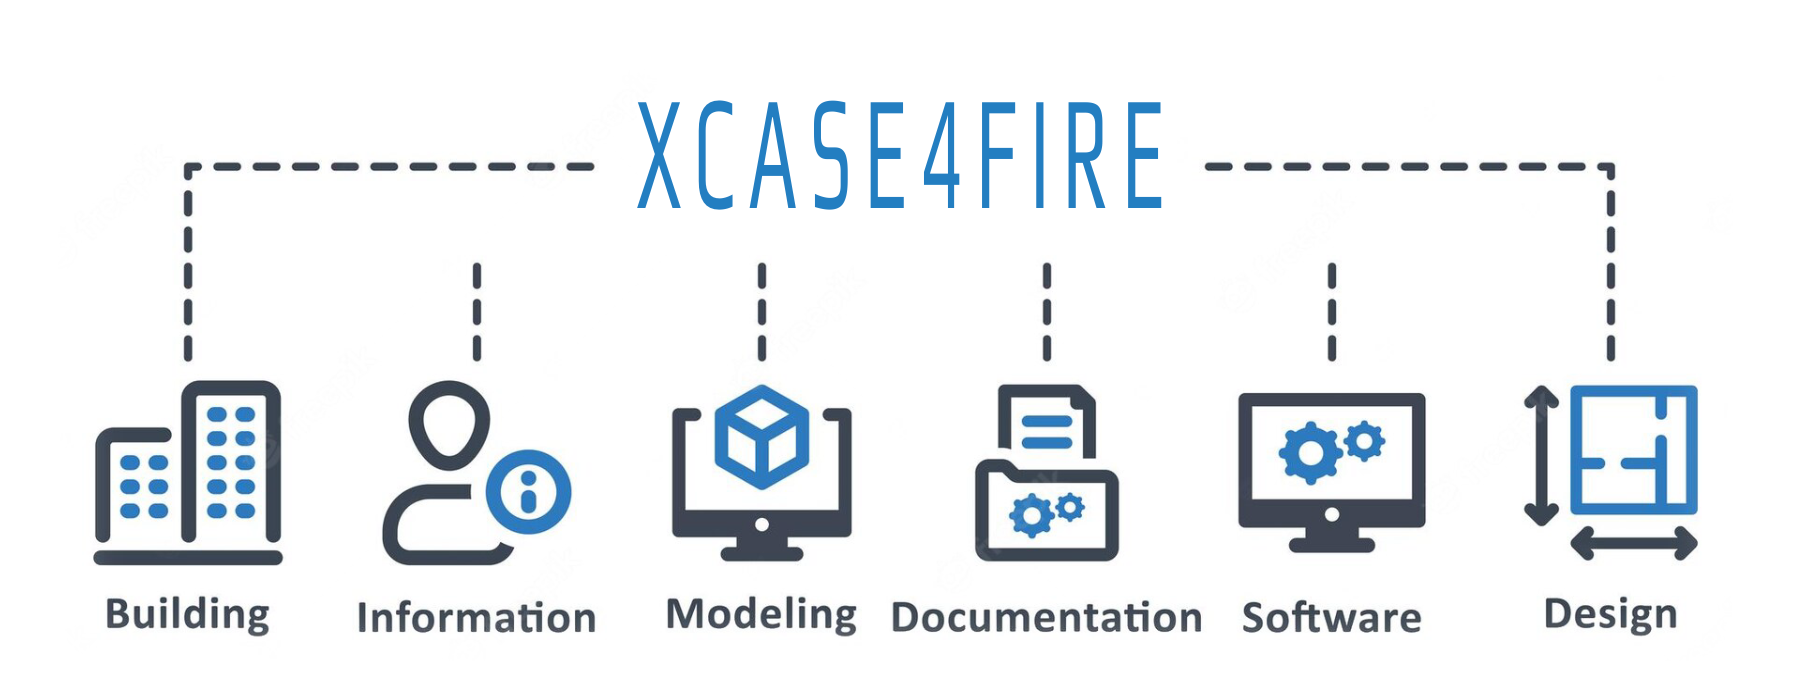 XCASE4Fire